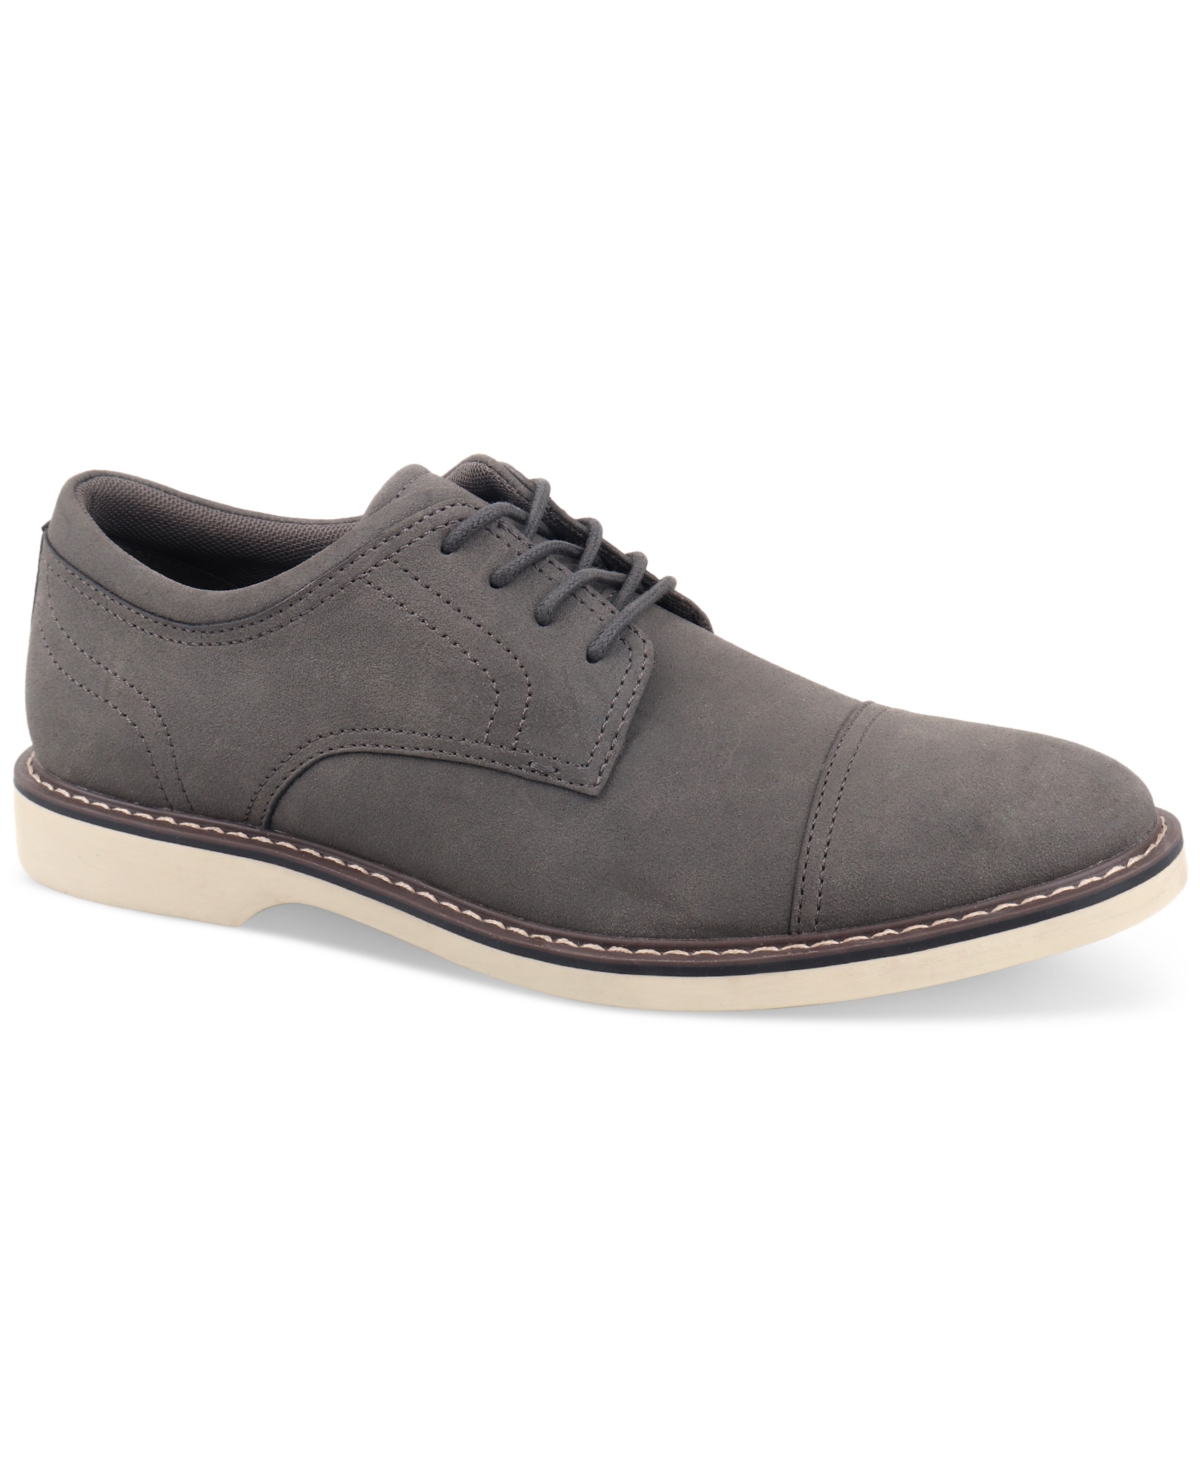 Men's Theo Lace-Up Shoes, Created for Macy's - Grey